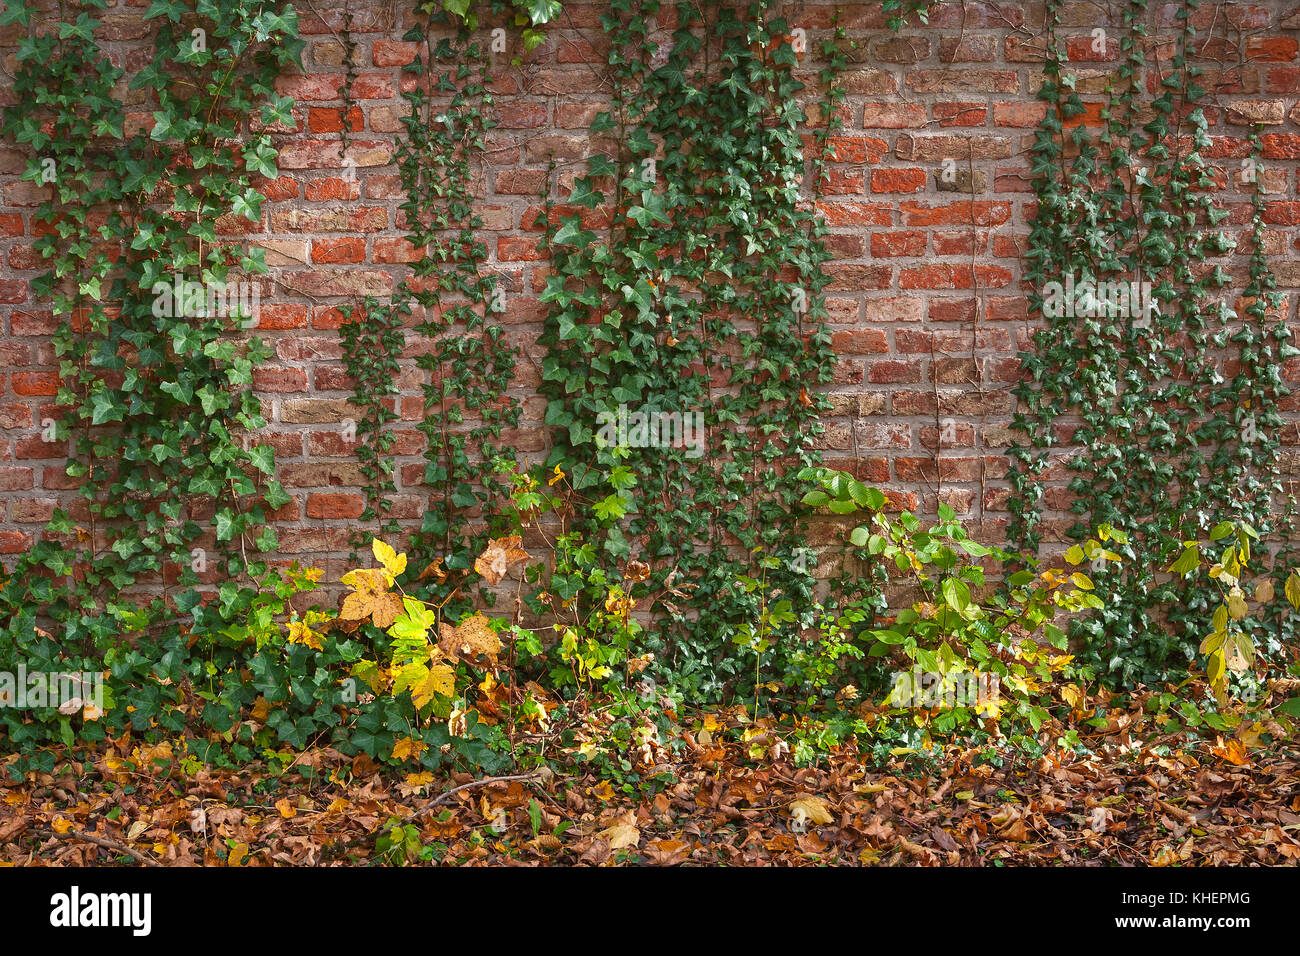 Brick wall overgrown with Common ivies (Hedera helix), Bavaria, Germany Stock Photo